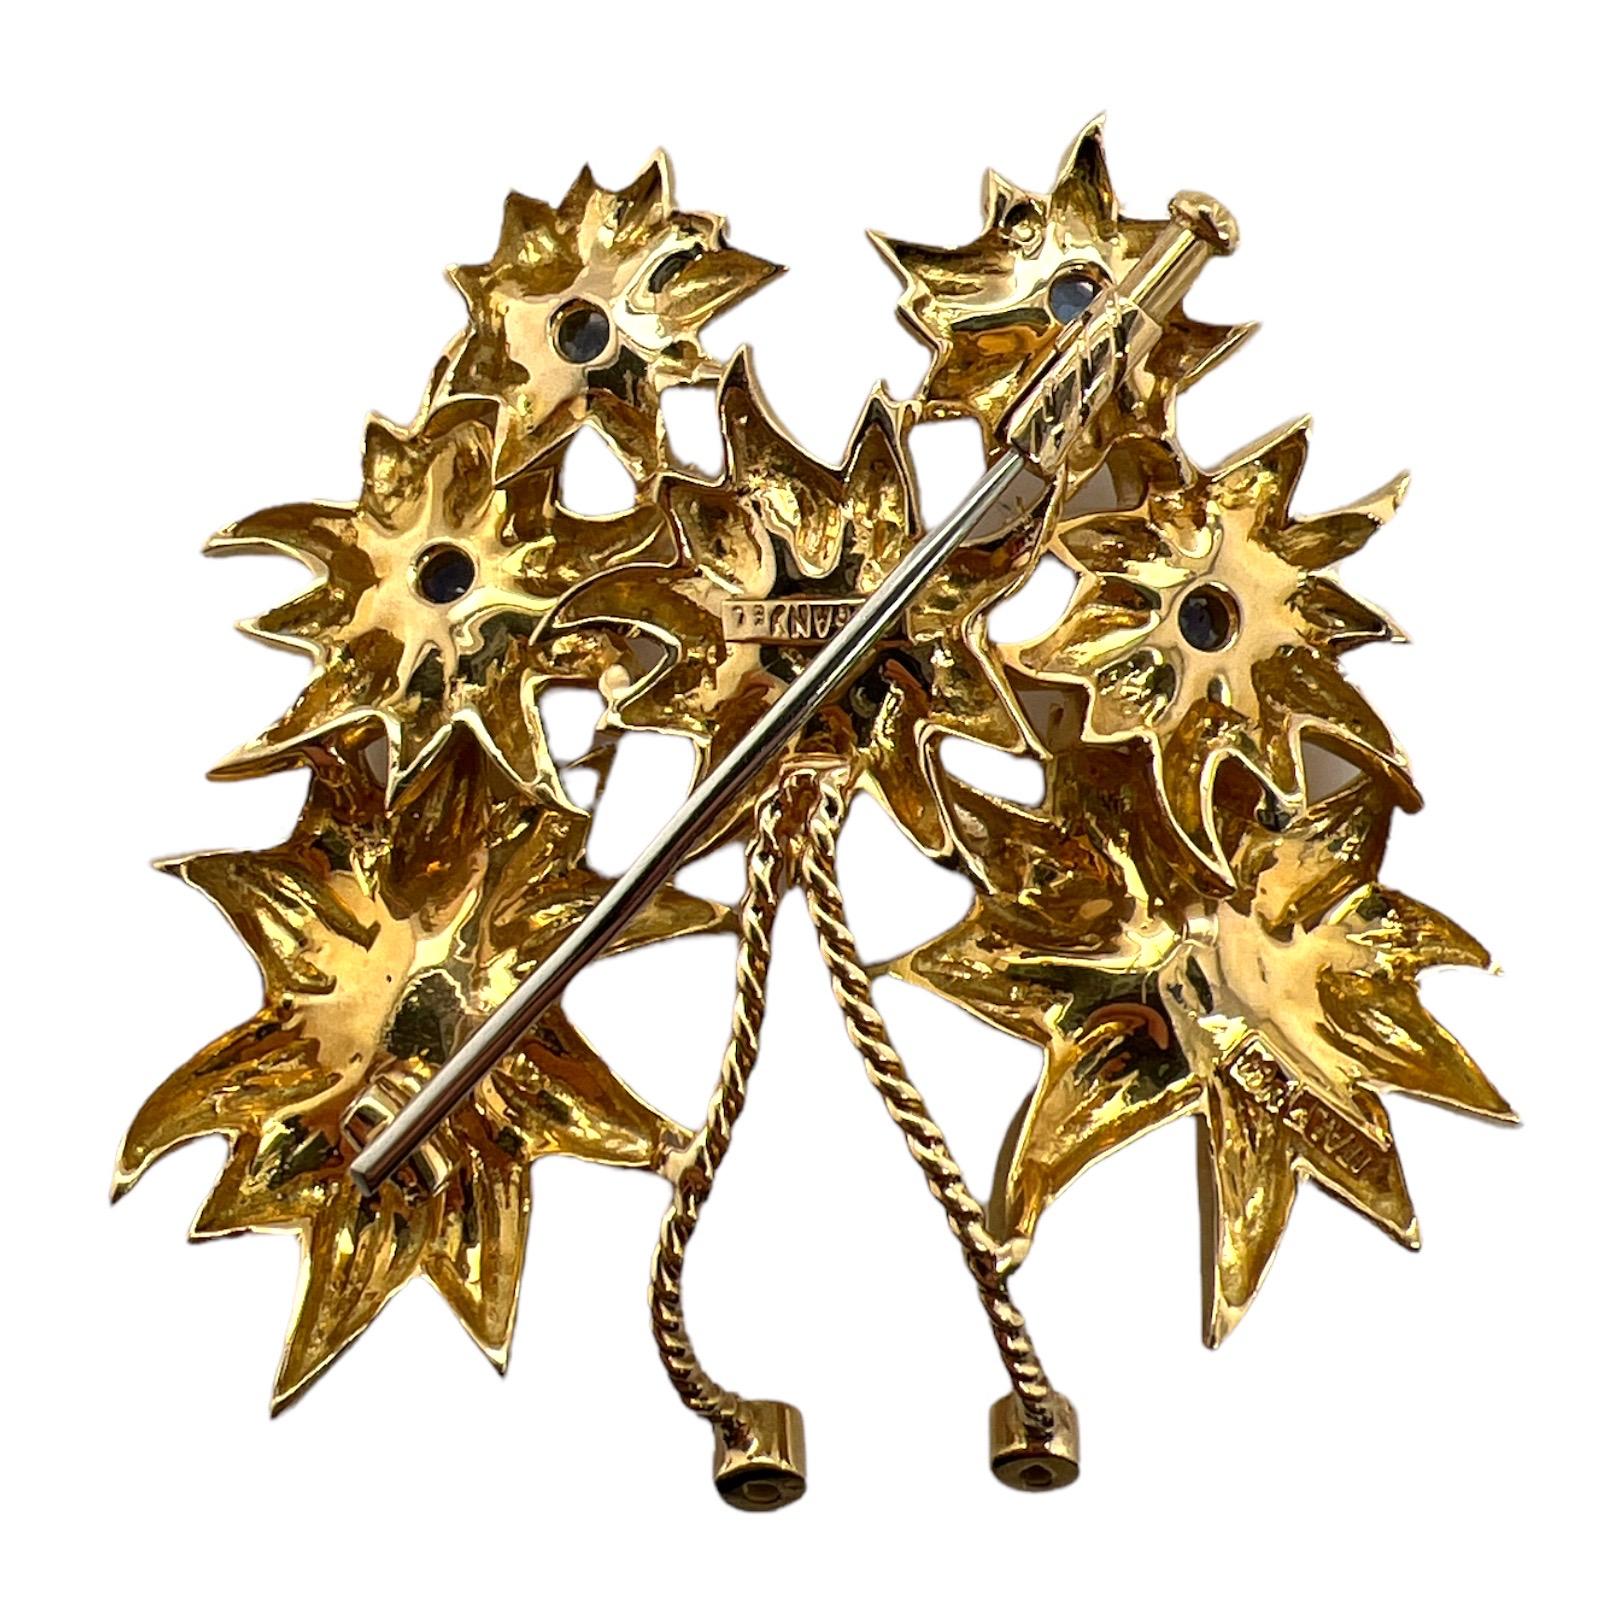 Beautifully crafted sapphire and pearl brooch by Tiffany & Co. Italy. The brooch is handcrafted in 18 karat yellow gold and features a bouquet of flowers featuring natural blue sapphires and cultured pearls. The pin measures approximately 2.00 x